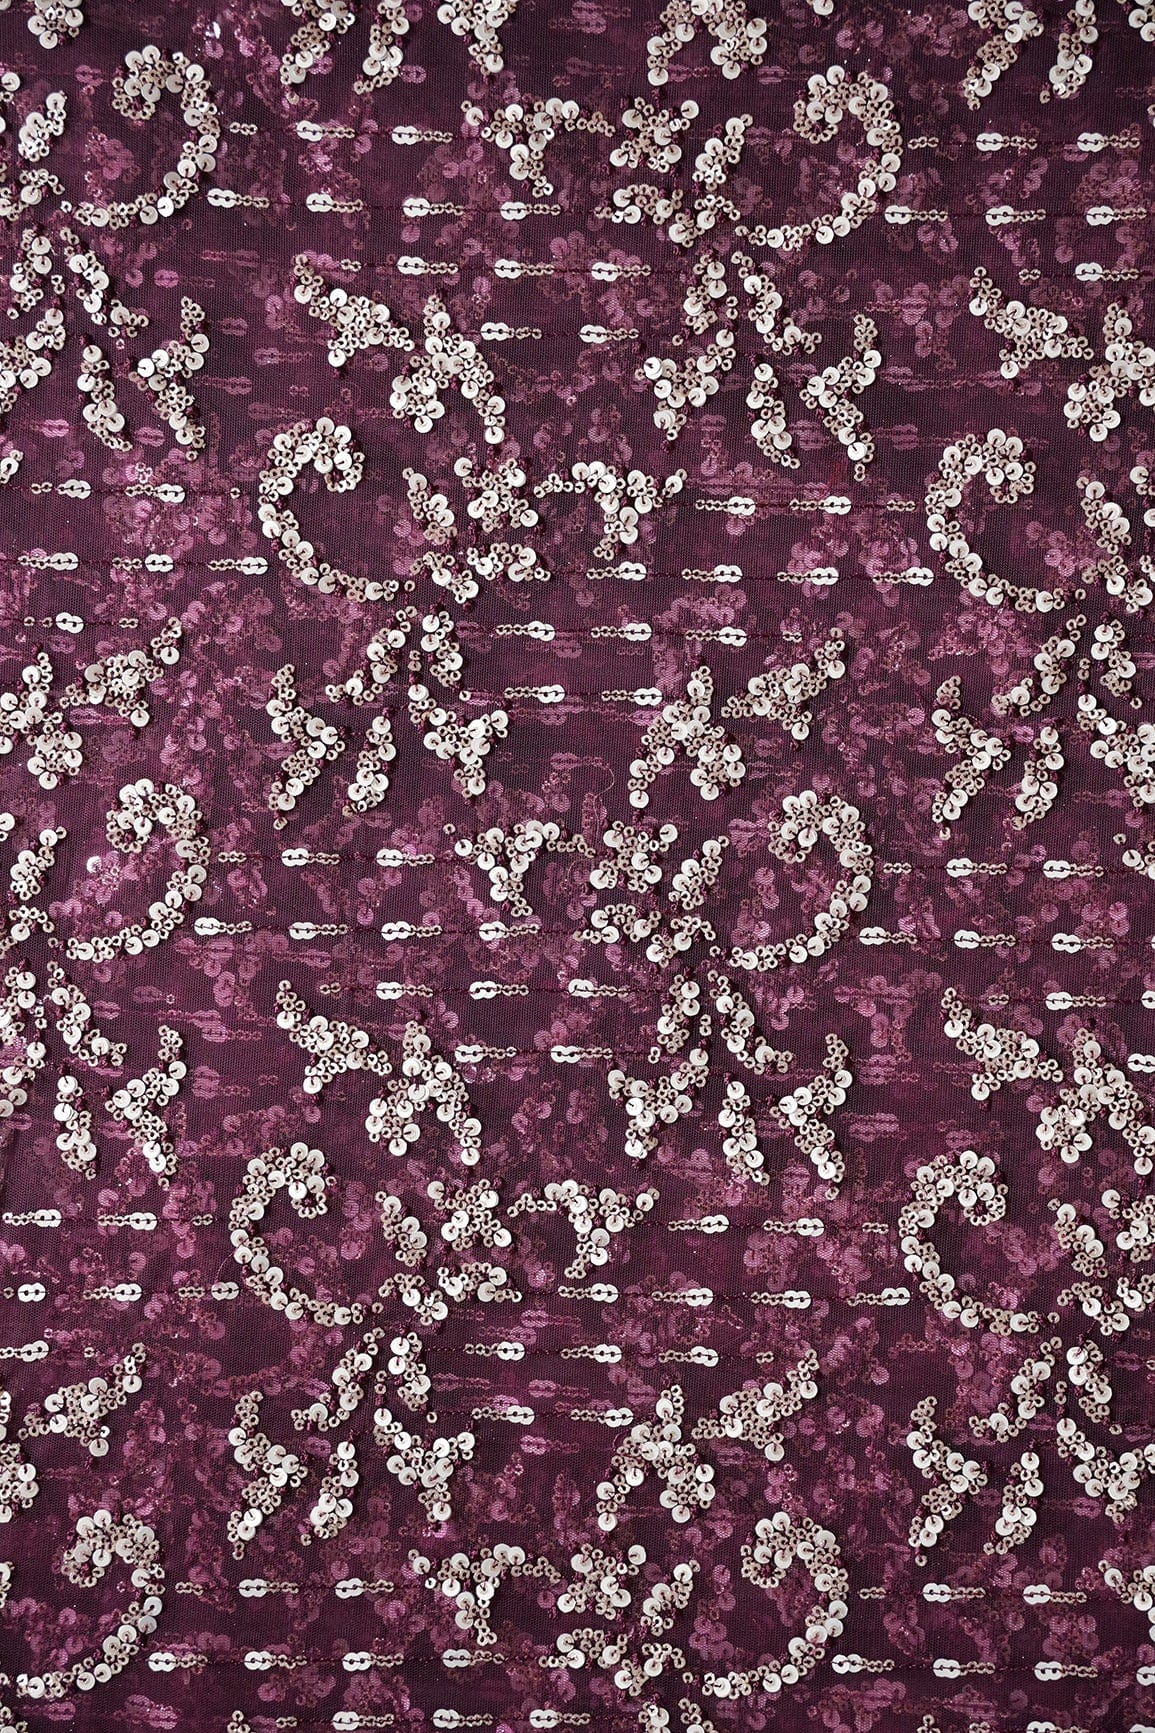 doeraa Embroidery Fabrics Gold And Silver Sequins With Wine Thread Abstract Embroidery Work On Wine Soft Net Fabric